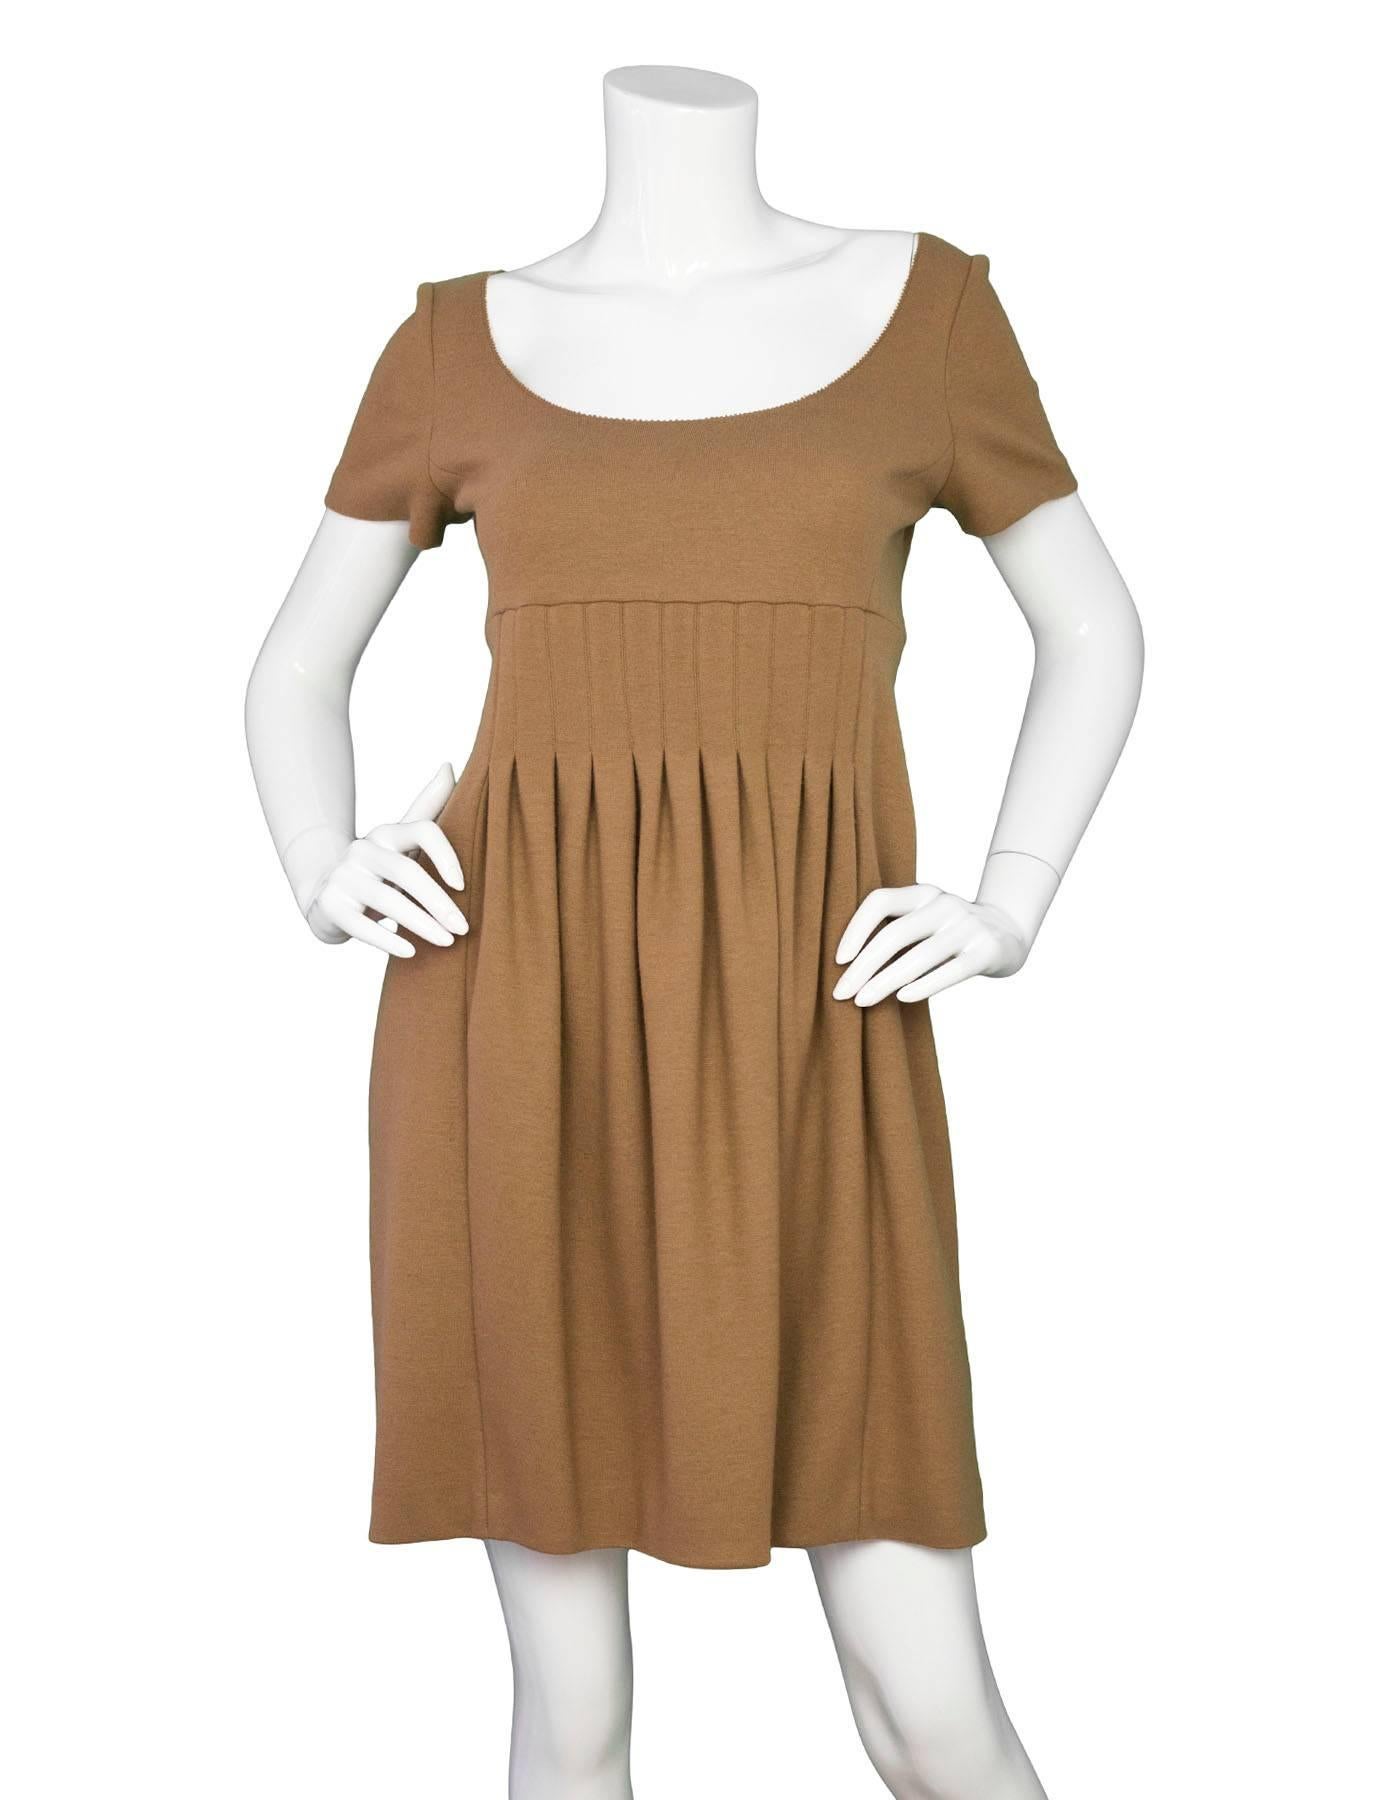 Fendi Brown Wool Short Sleeve Pleated Dress Sz IT40

Made In: Italy
Color: Brown
Composition: 100% Wool
Lining: Brown textile
Closure/Opening: Back zip closure
Overall Condition: Excellent pre-owned condition

Marked Size: IT40 / US 2,4
Bust: